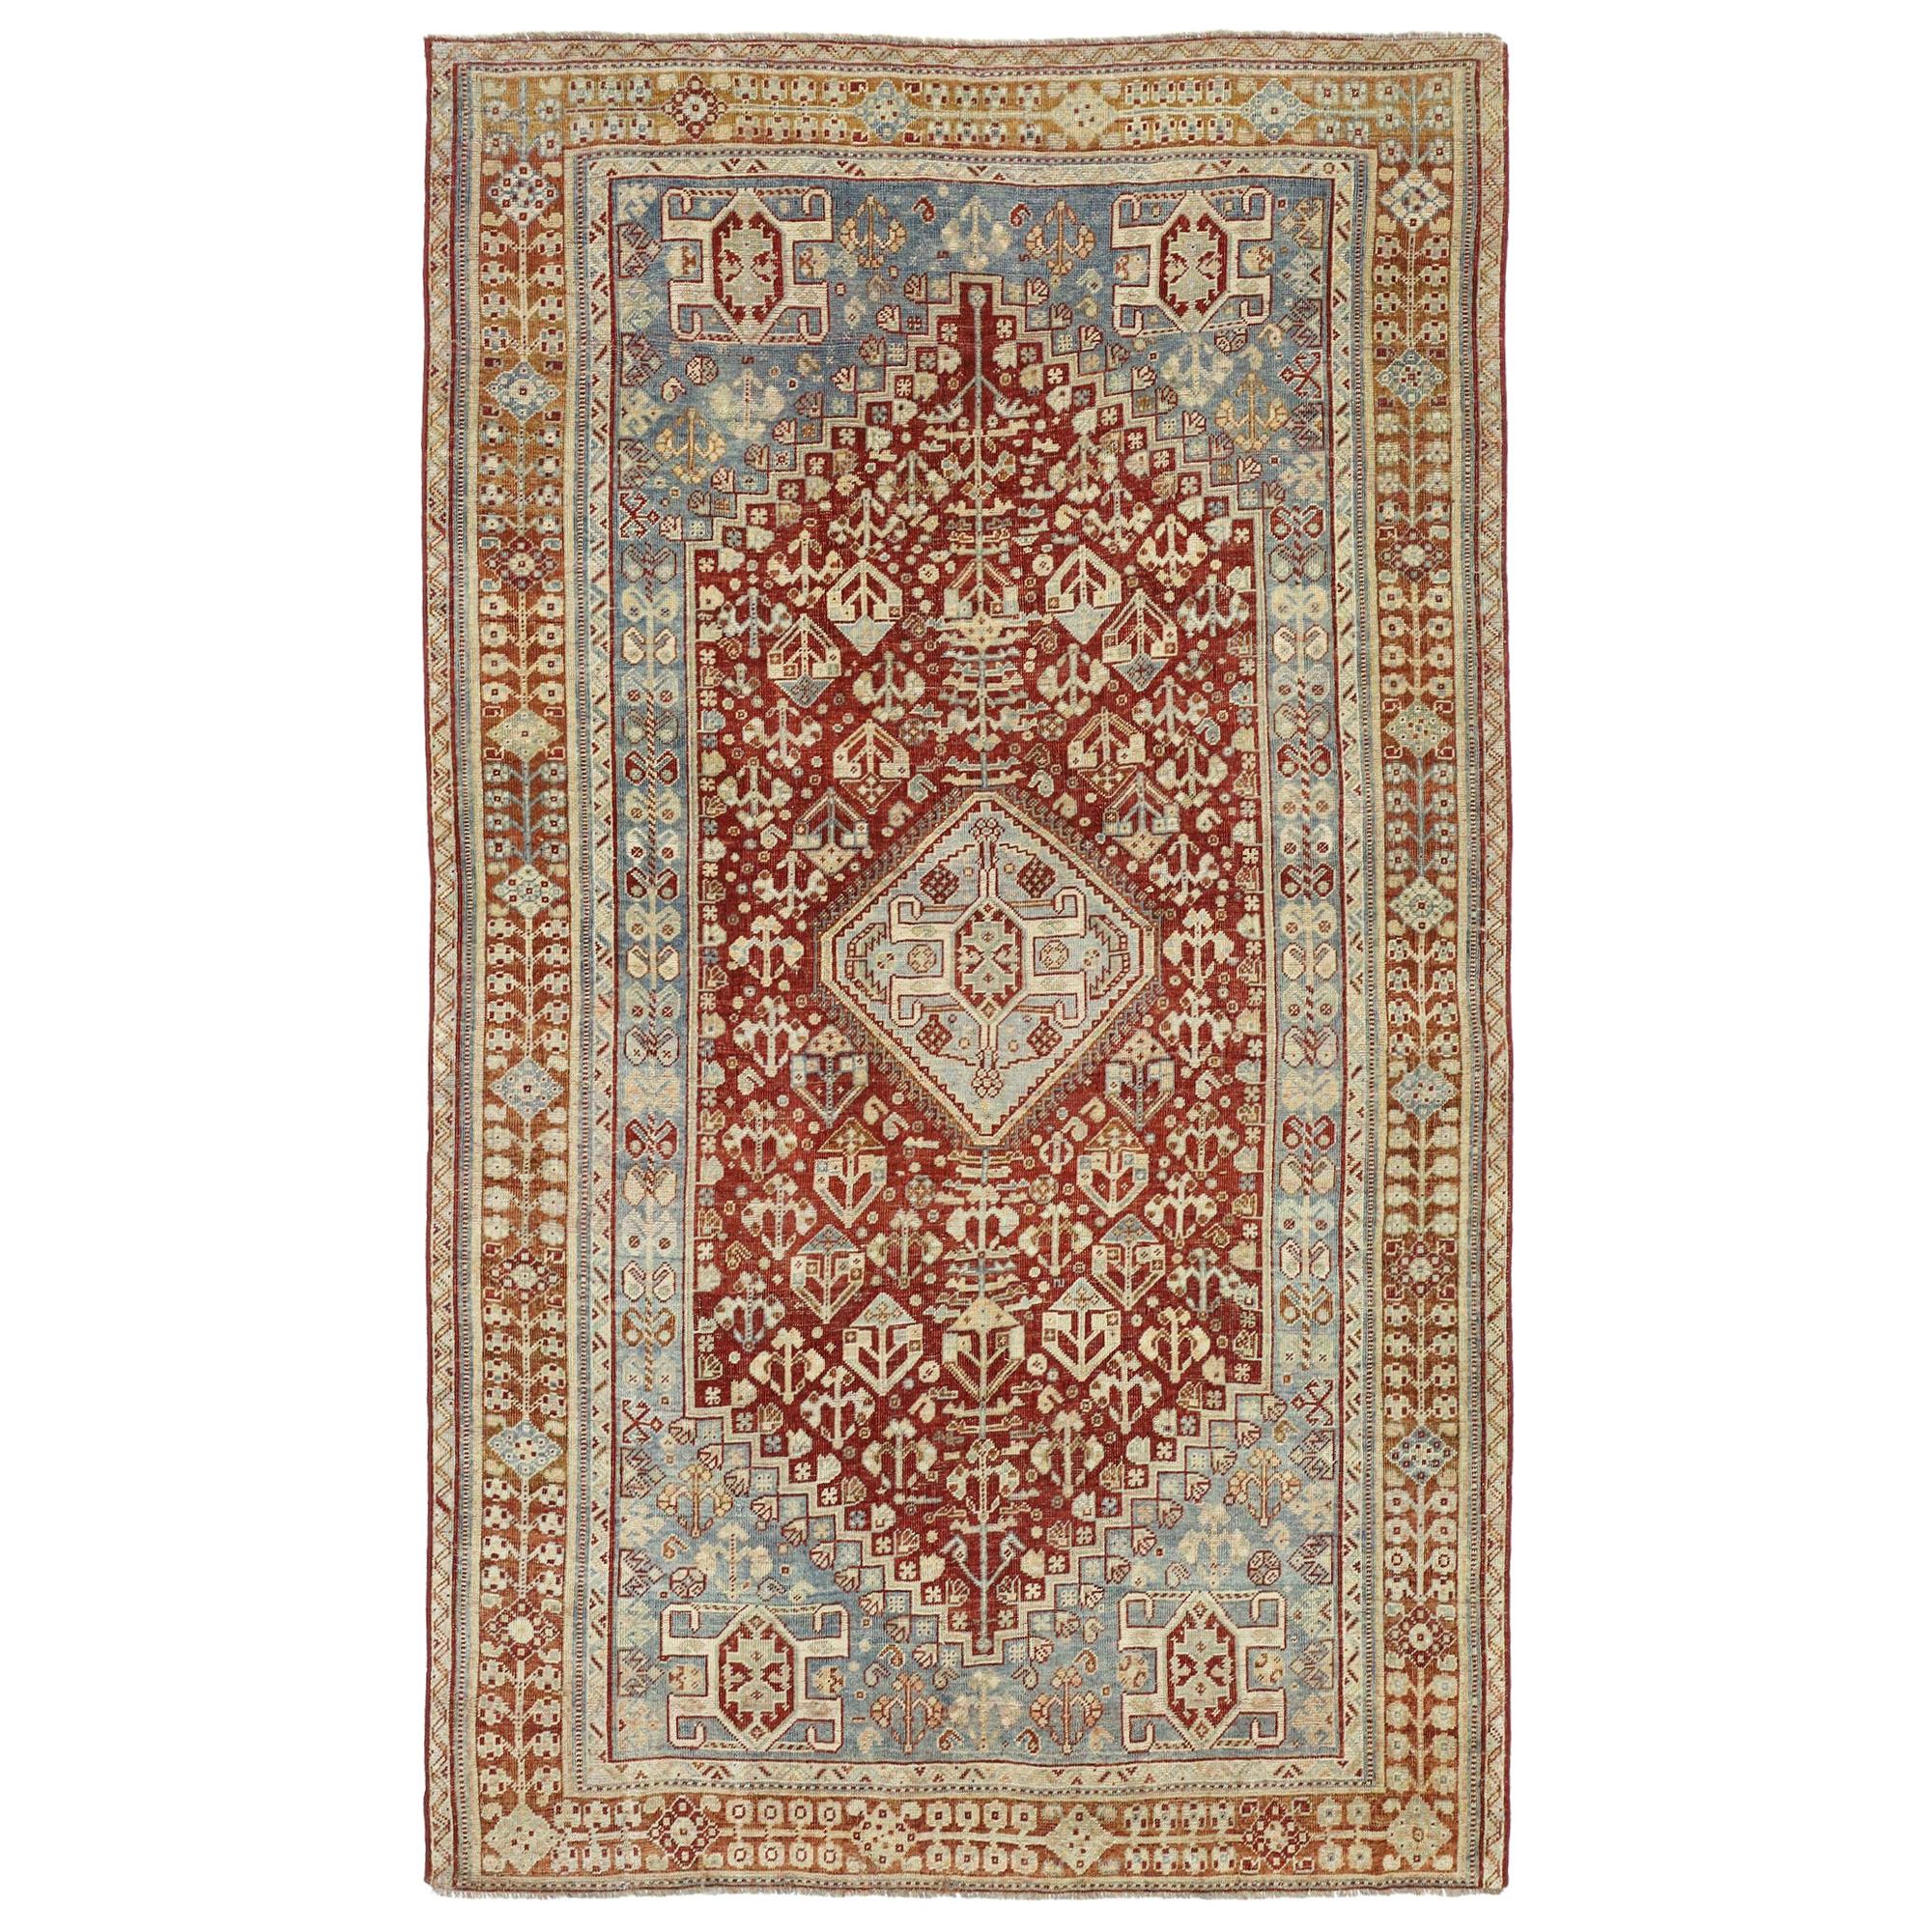 Distressed Antique Persian Shiraz Design Rug with Rustic Jacobean Tribal Style